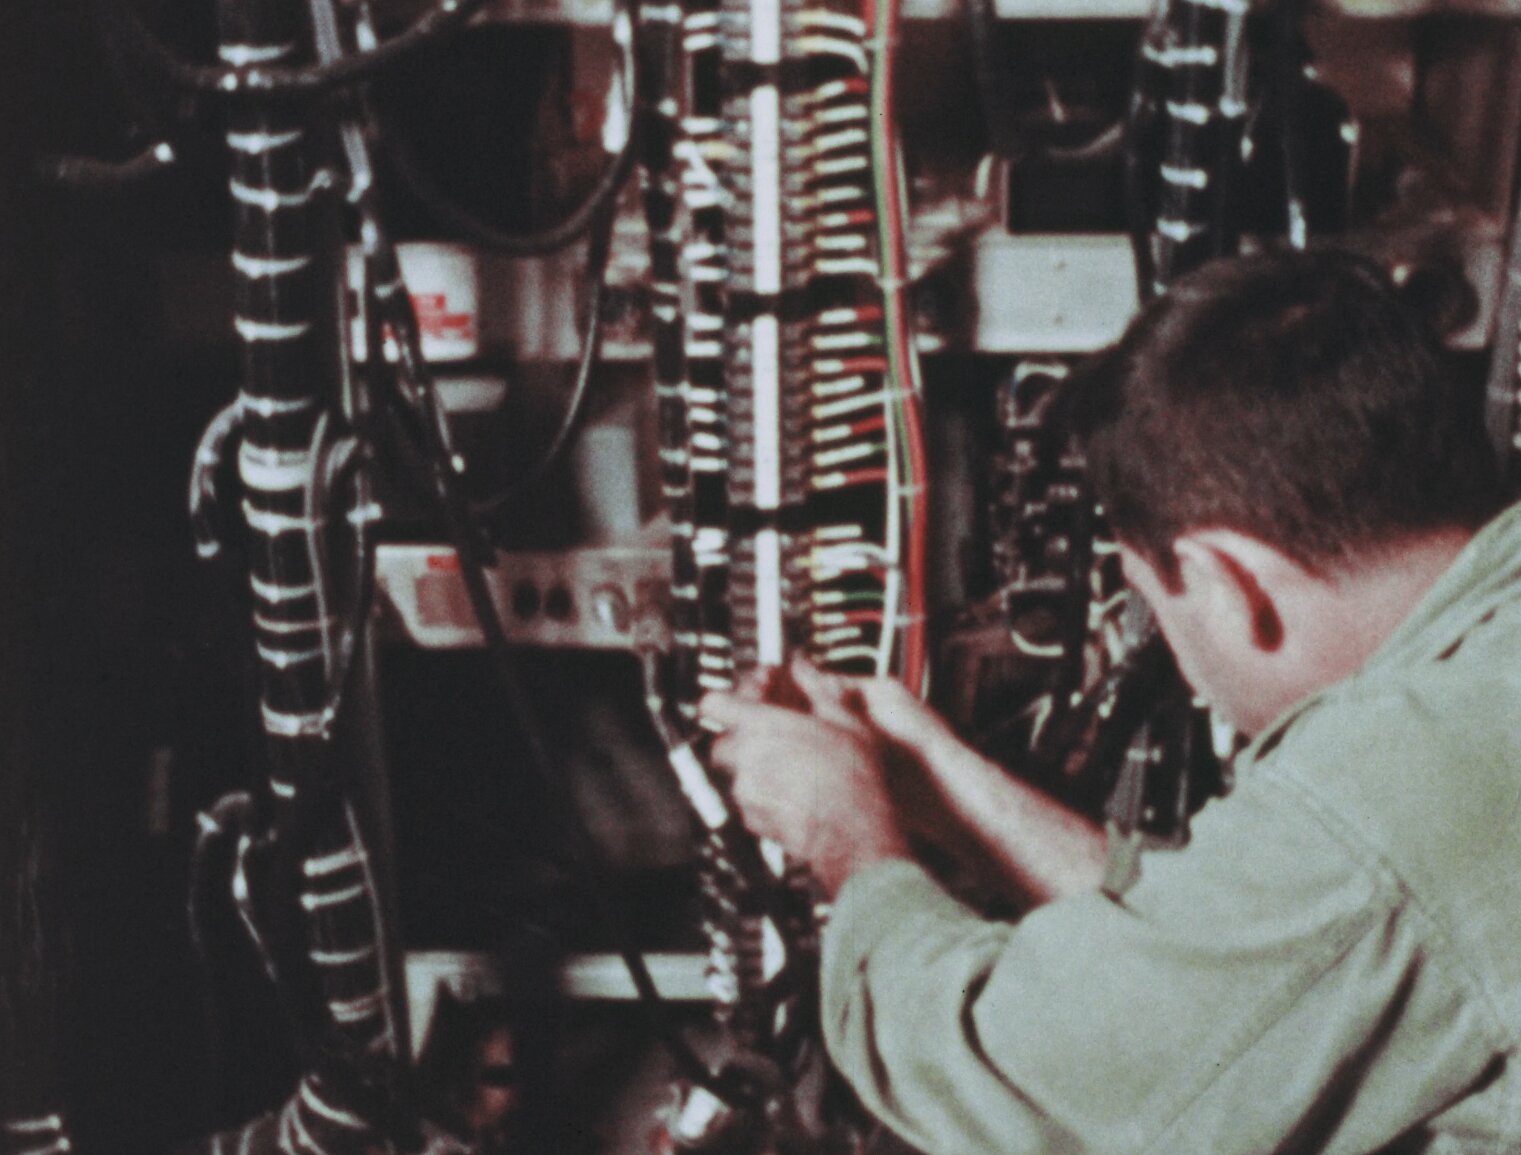 Technician attaches many red and green and black wires to a connection terminal of some kind.